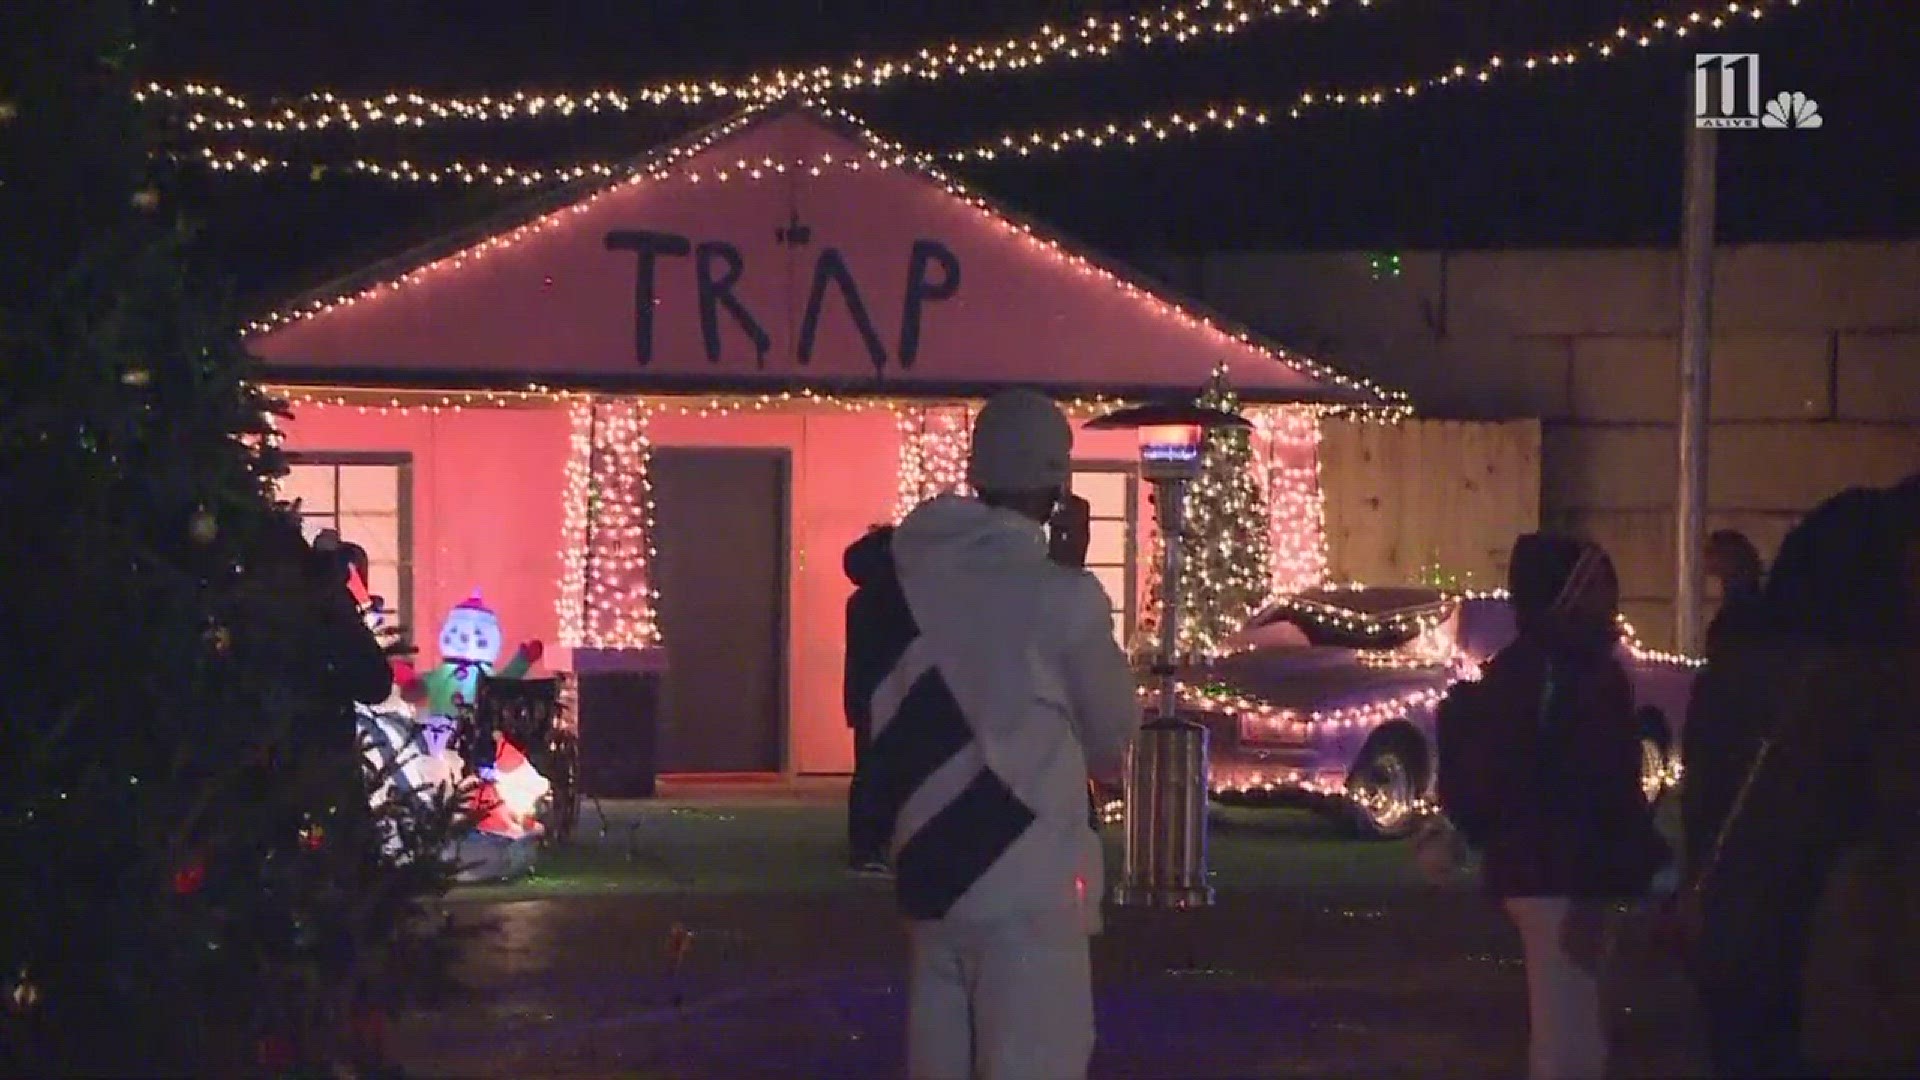 In the words of 2 Chainz at the inaugural Trap Wonderland: "It's lit!"